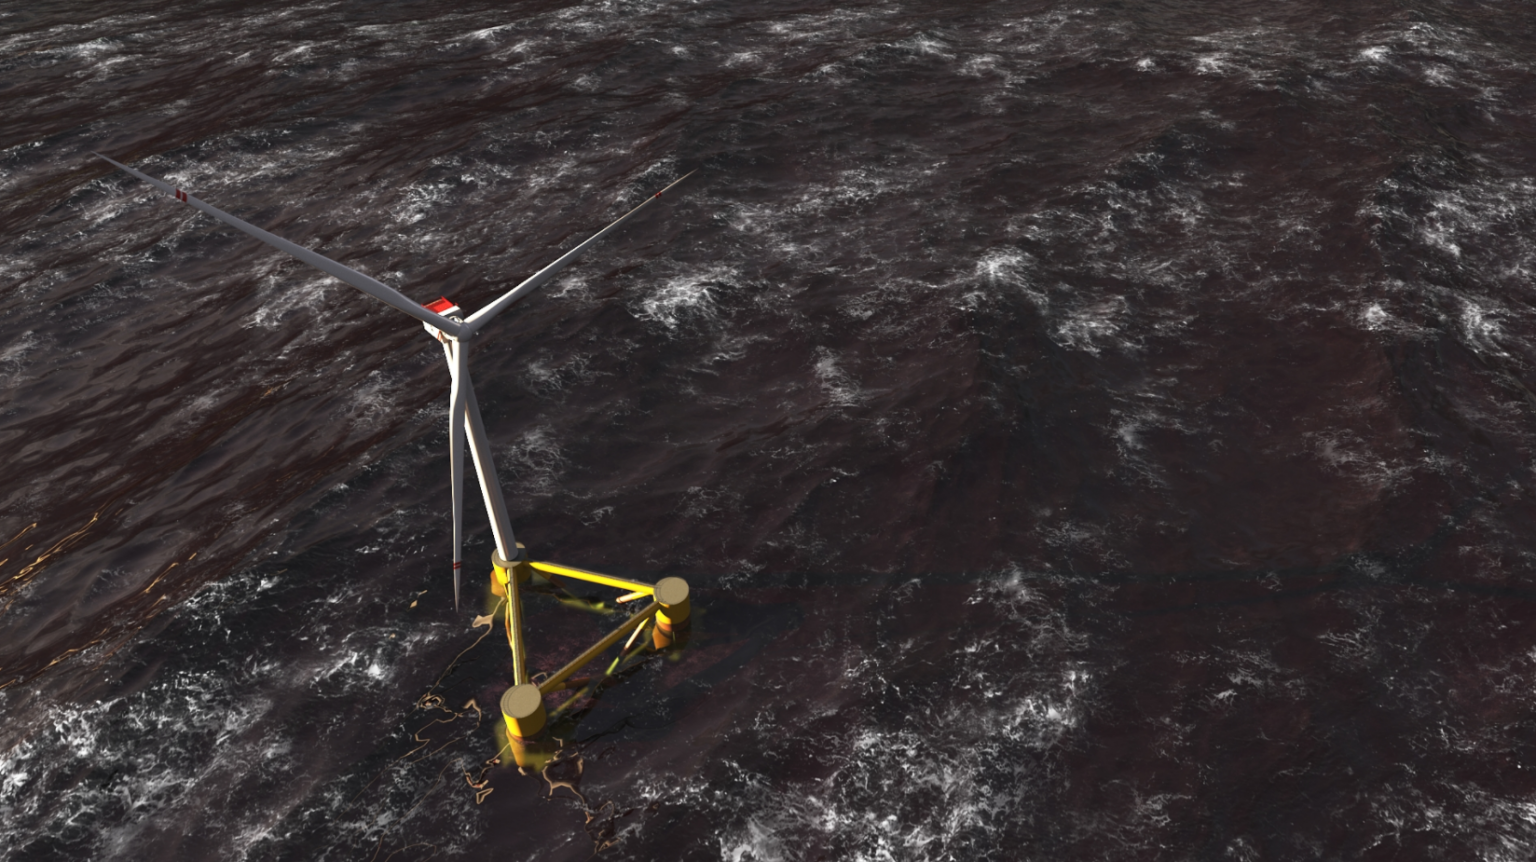 Aker Offshore Wind Ocean Winds And Statkraft Target Floating Wind Offshore Norway Offshore Wind